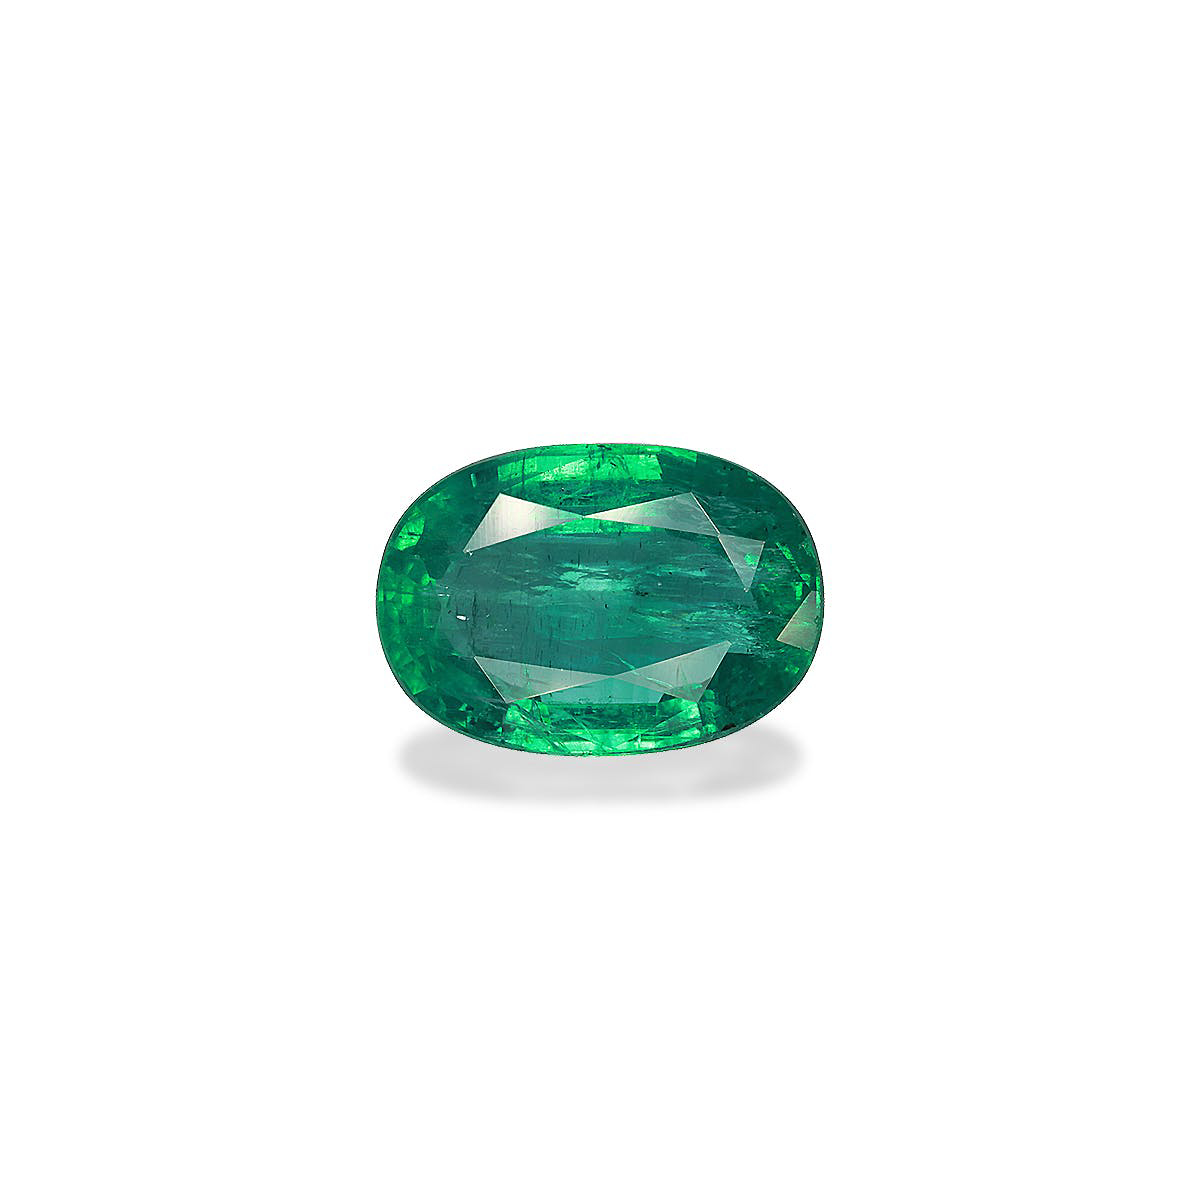 Picture of Green Zambian Emerald 12.24ct (PG0047)